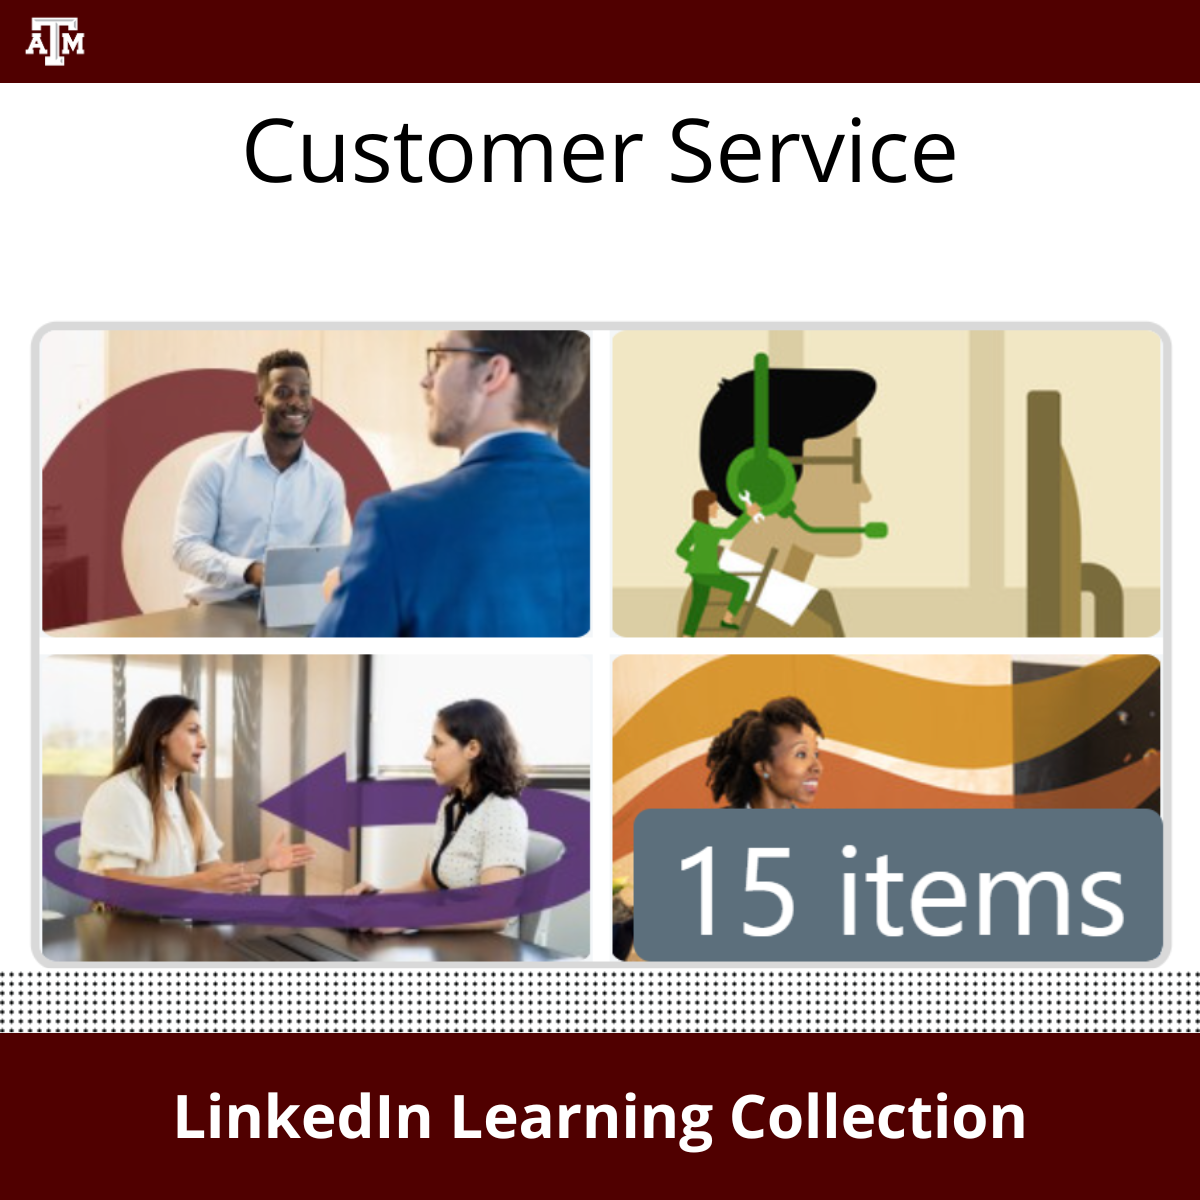 LinkedIn Learning Collection:  Customer Service